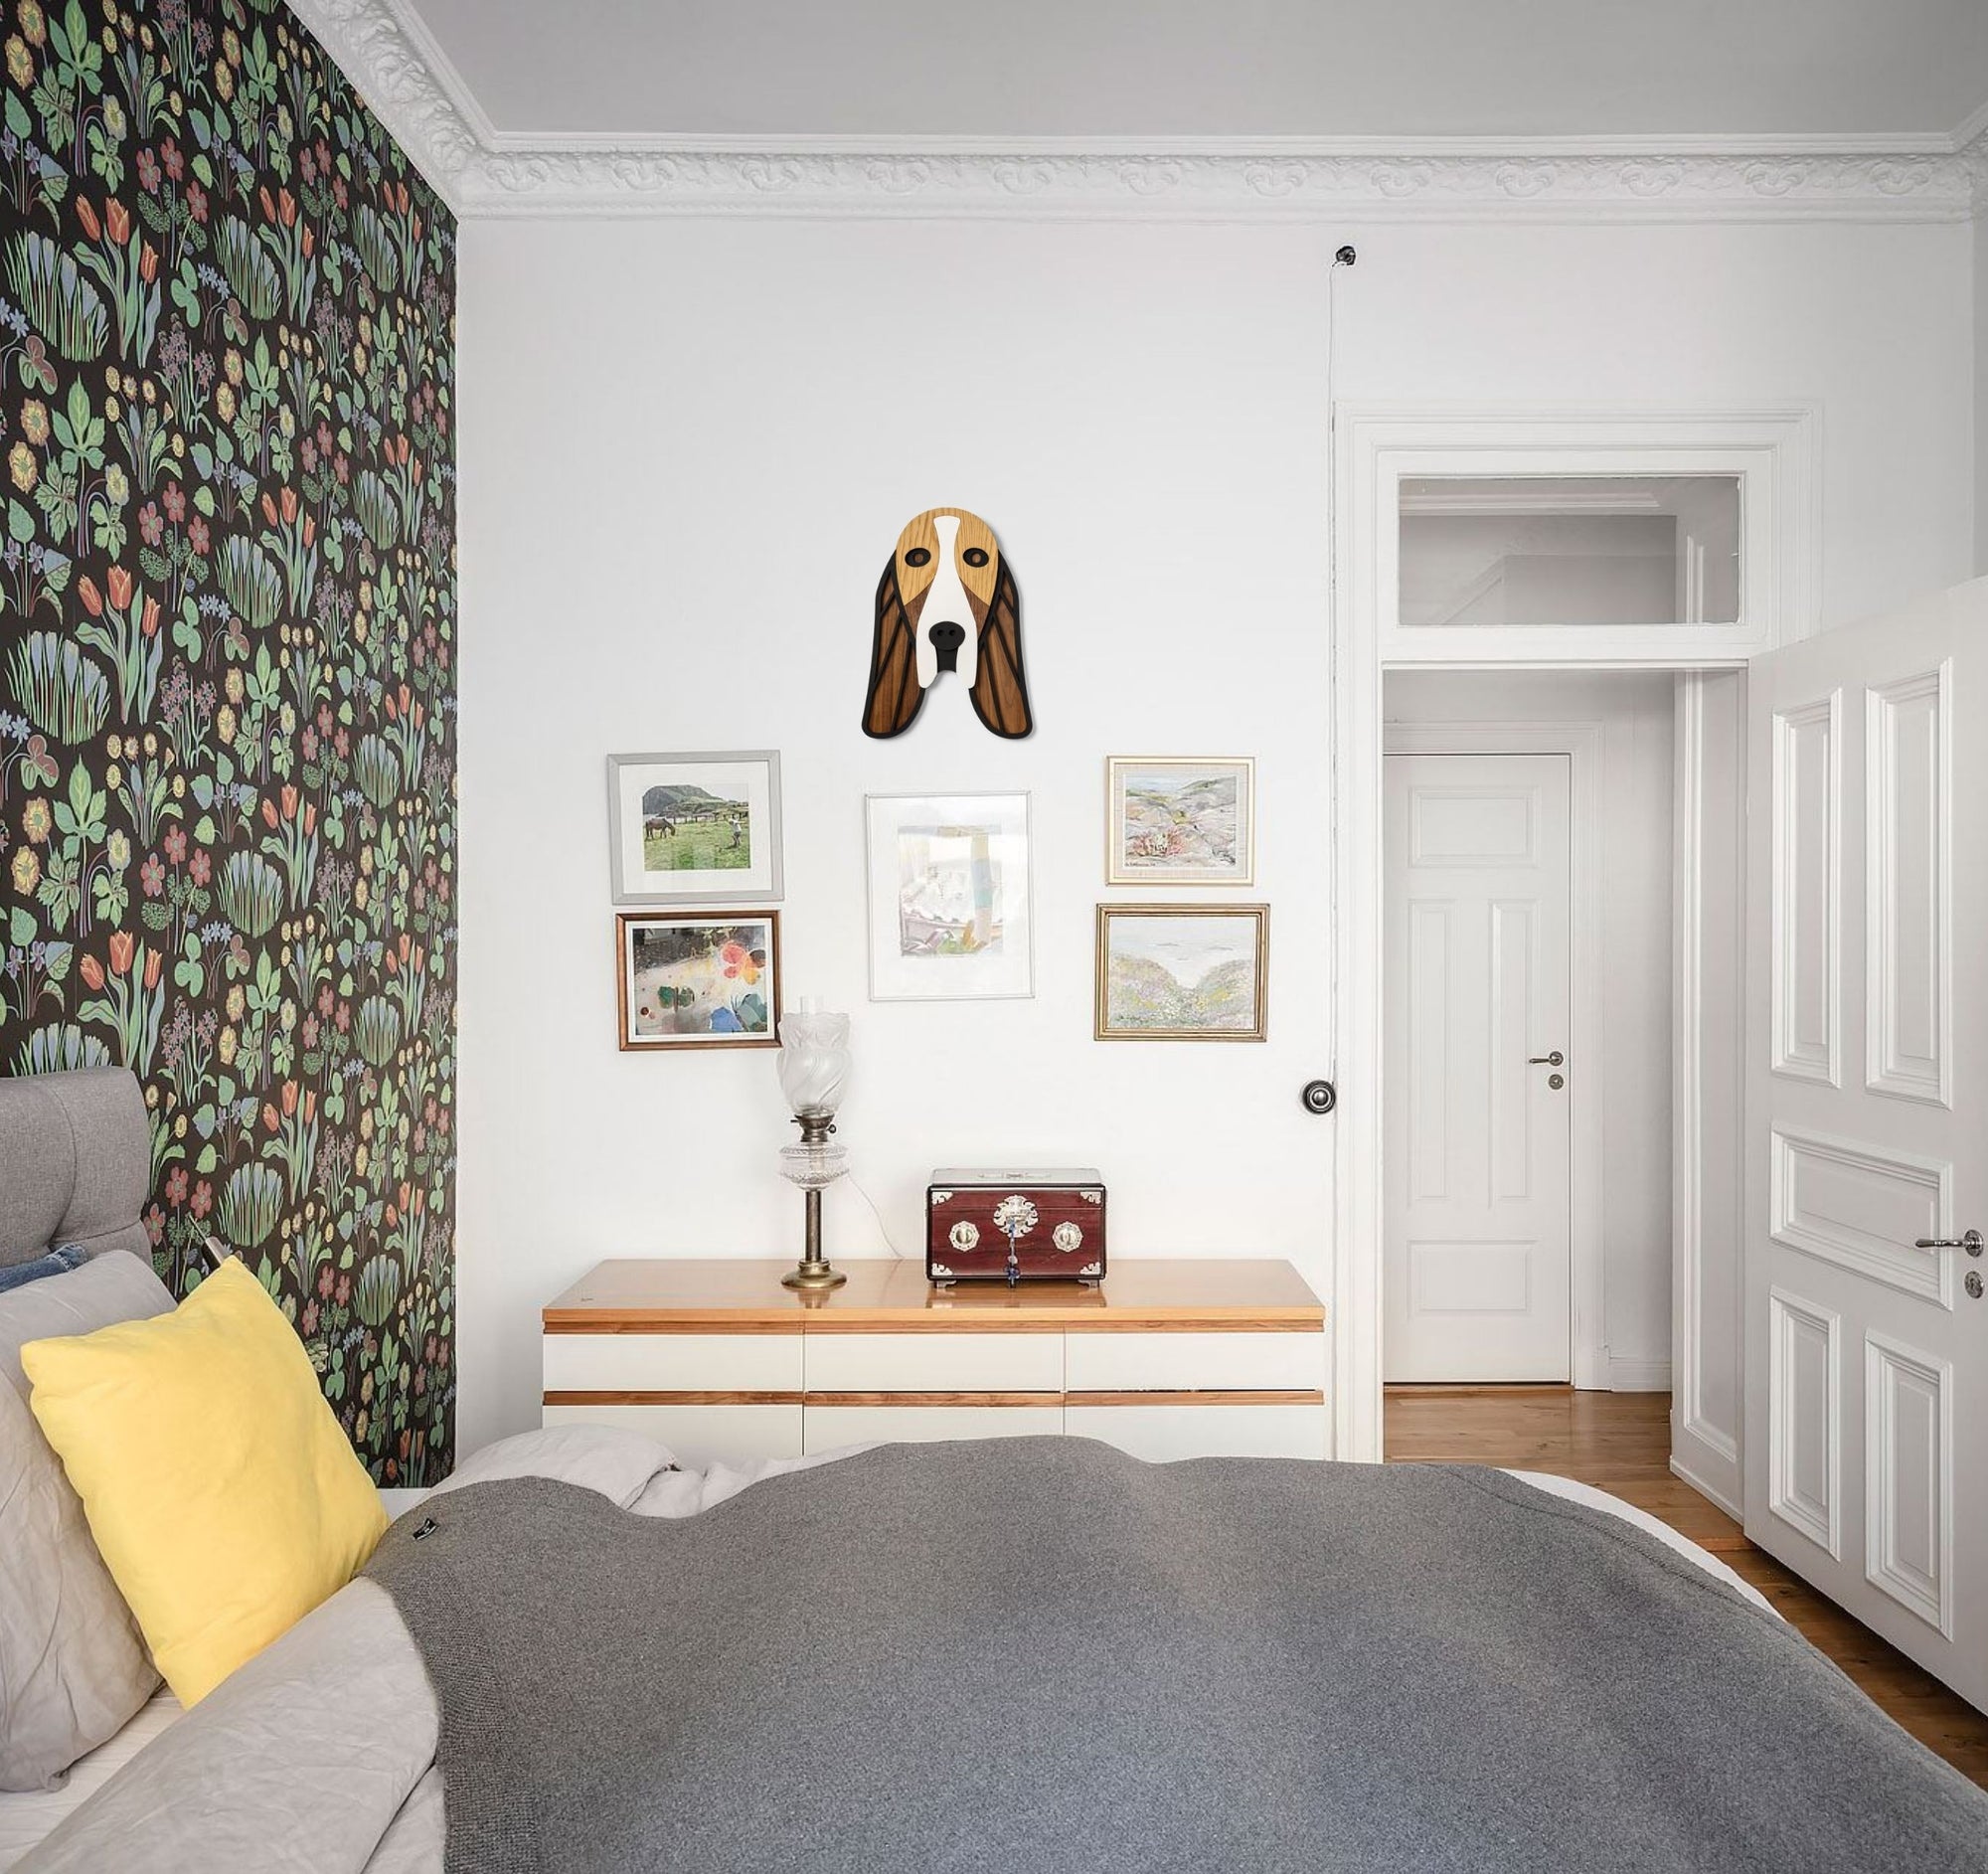 The dachshund wall art is a new dog-themed gifts